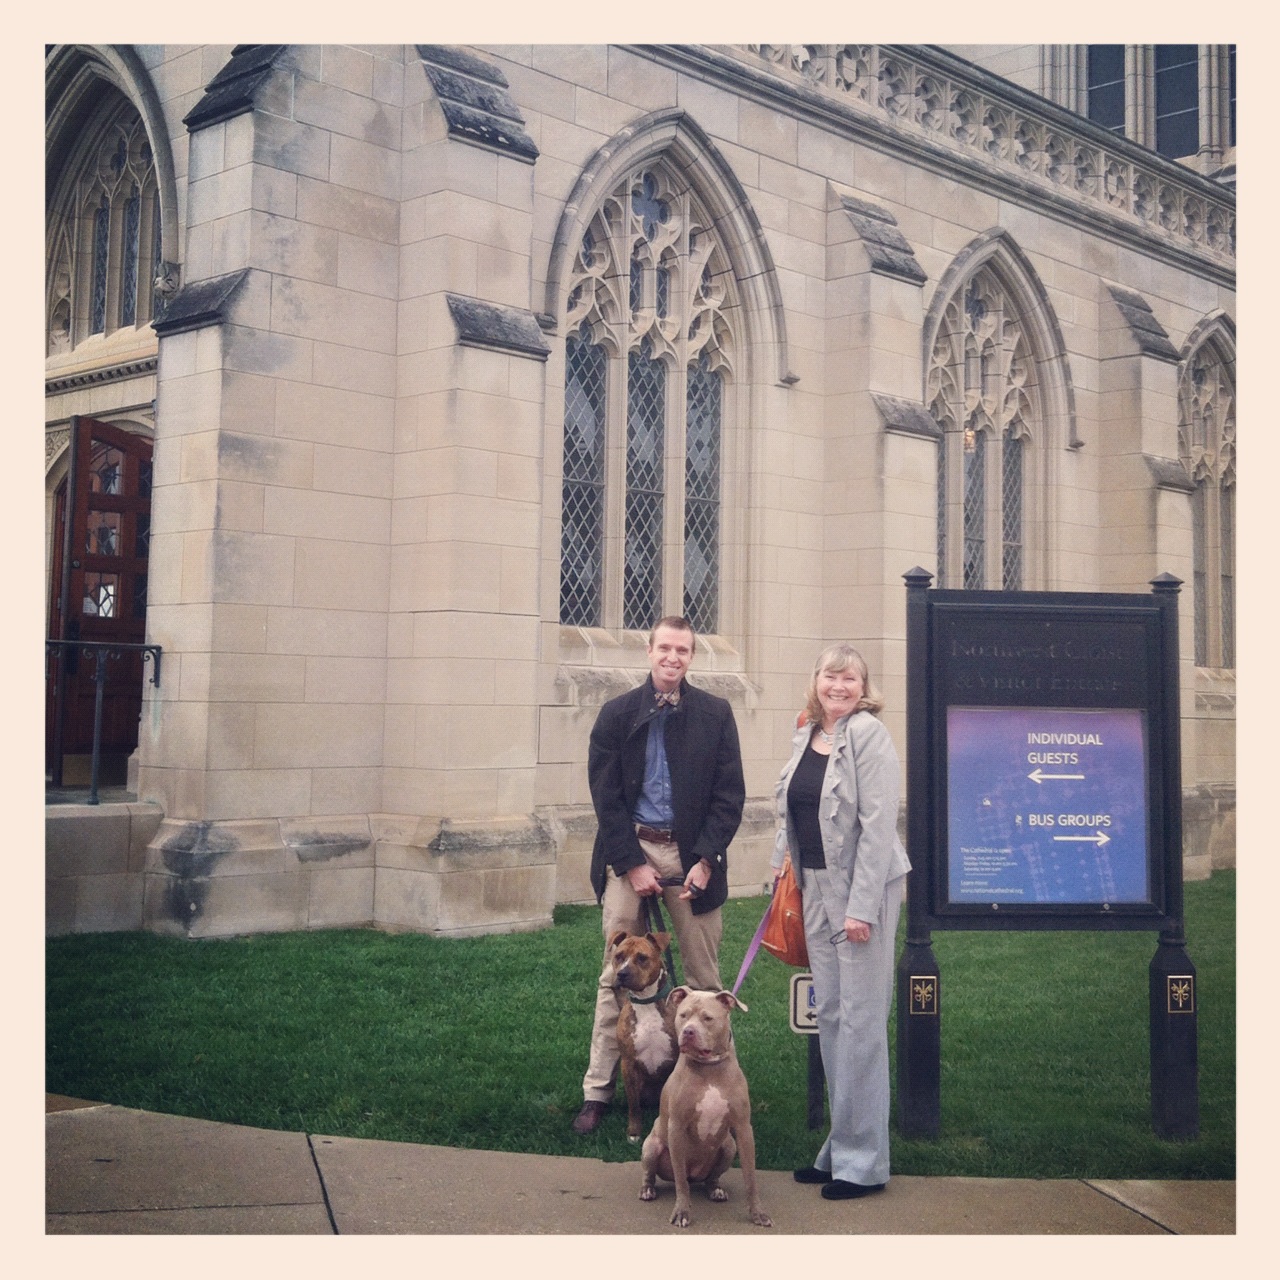 Winifred's visit - at the blessing of the animals at the National Cathedral